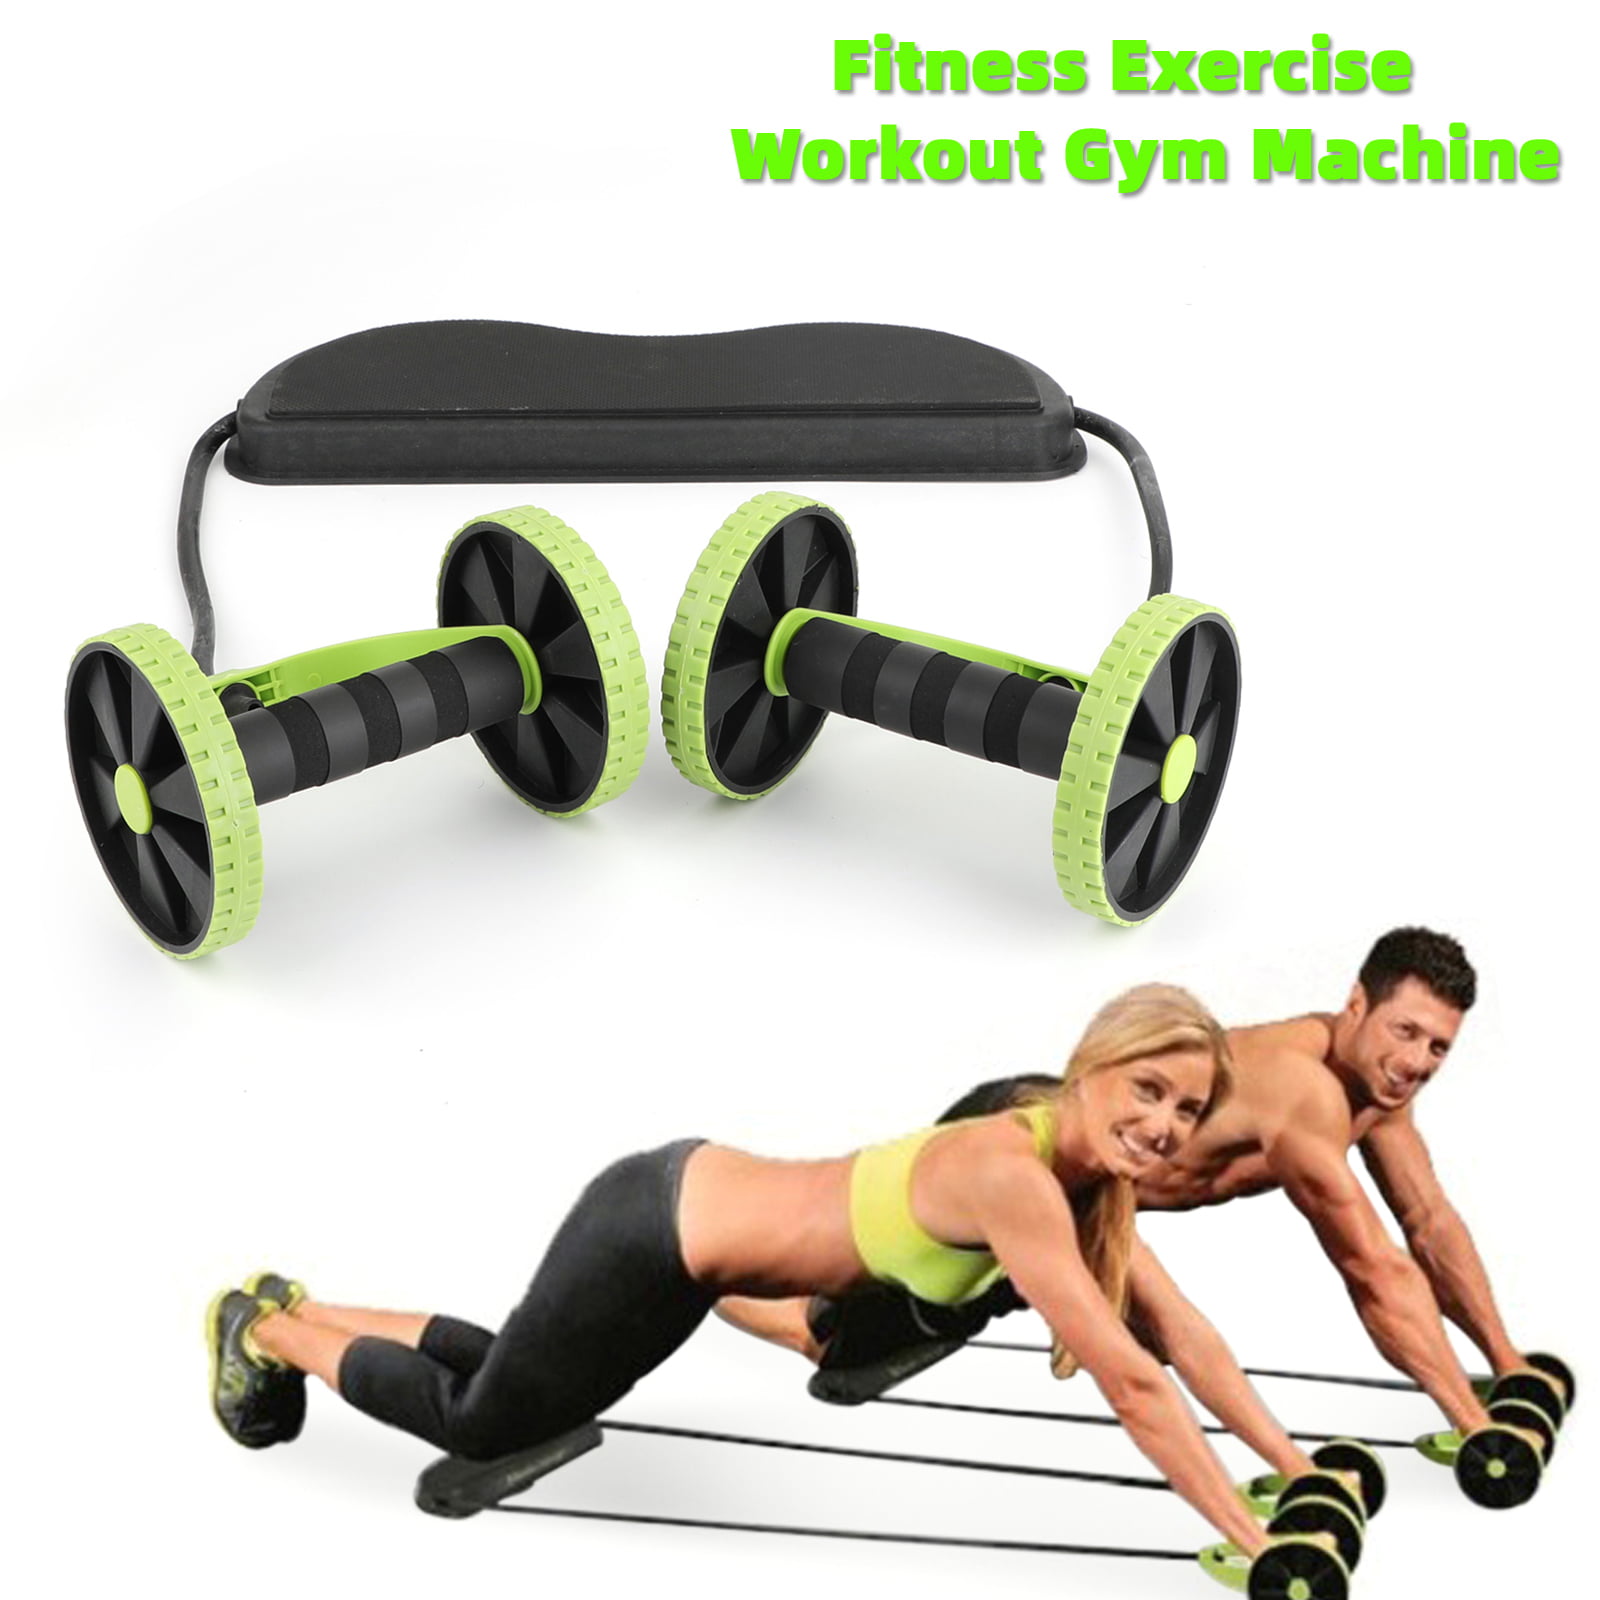 Details about   Abdominal Abs Roller Waist Wheel Handle Fitness Exercise Workout Gym Machine US 